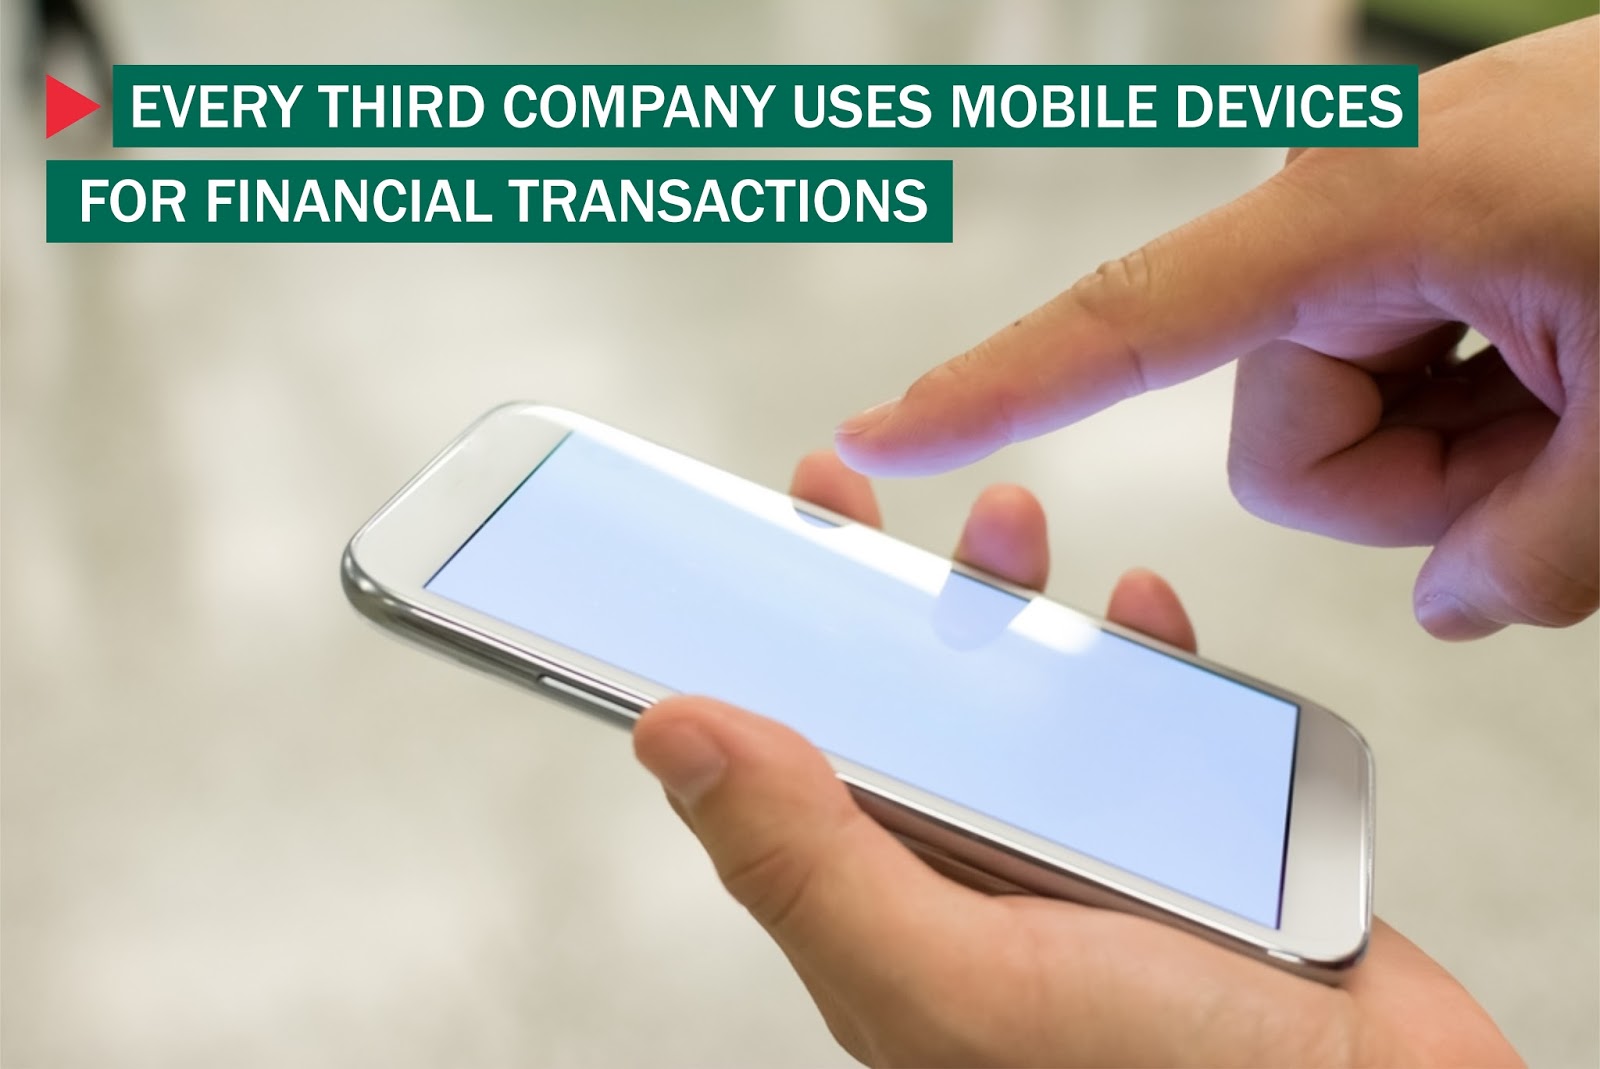 Every Third Company Uses Mobile Devices for Financial Transactions